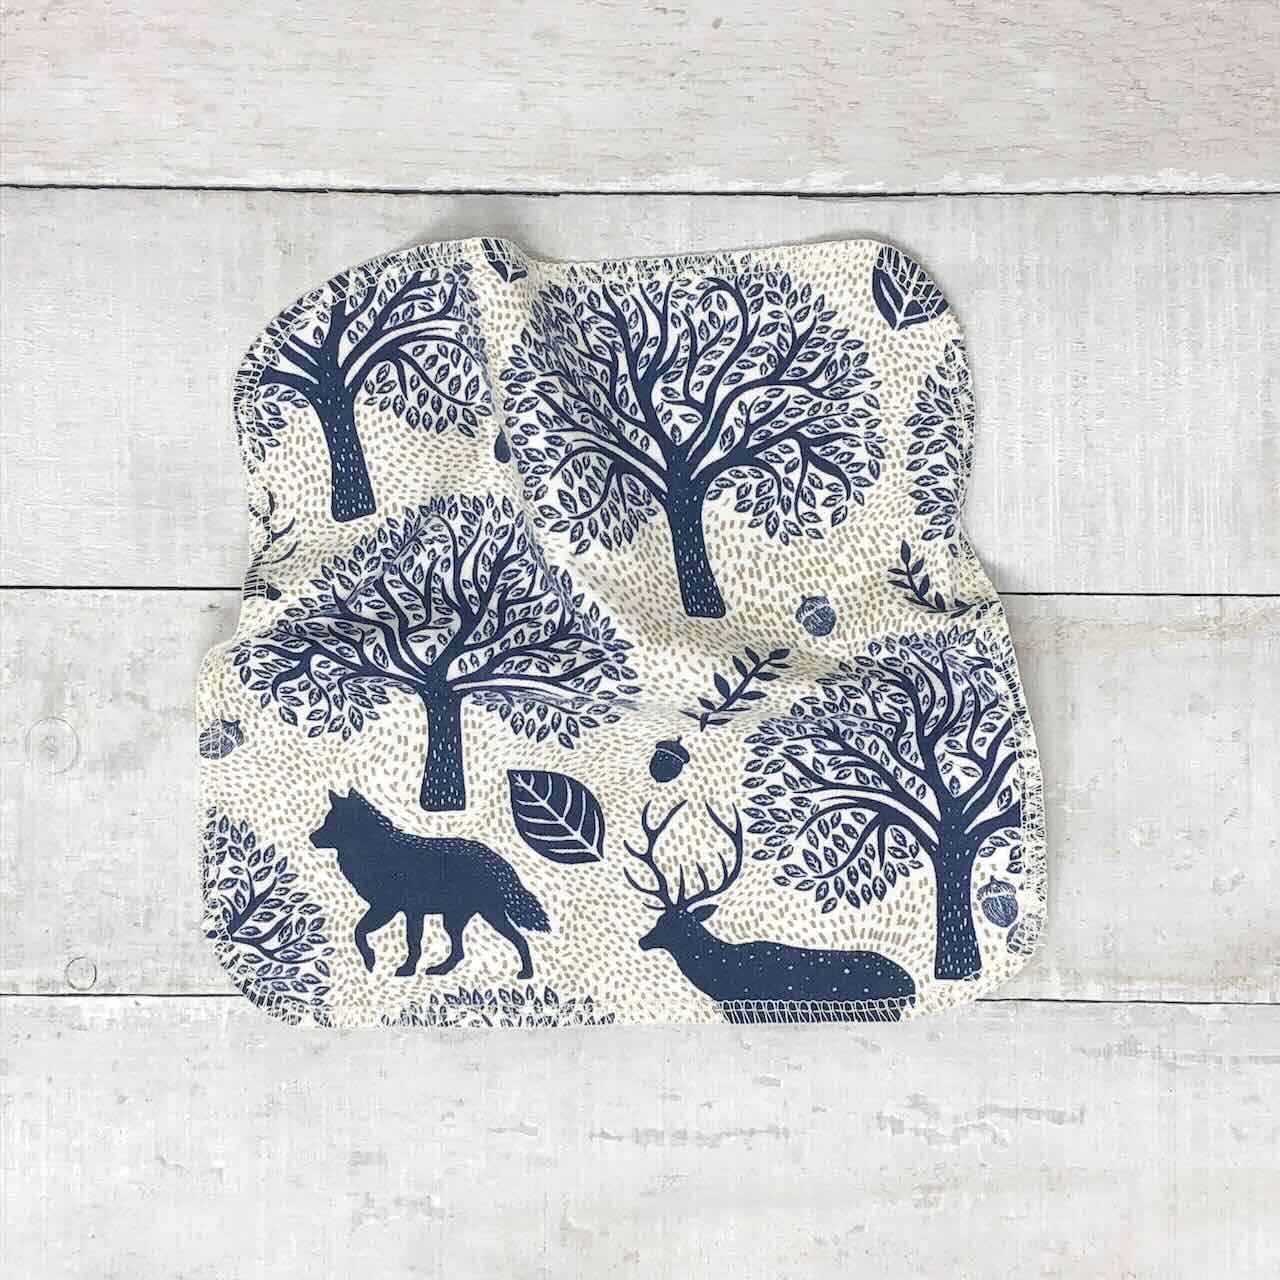 flat lay of a set of 10 reusable cloth wipes, with elegant forest animals printed on the fabric.